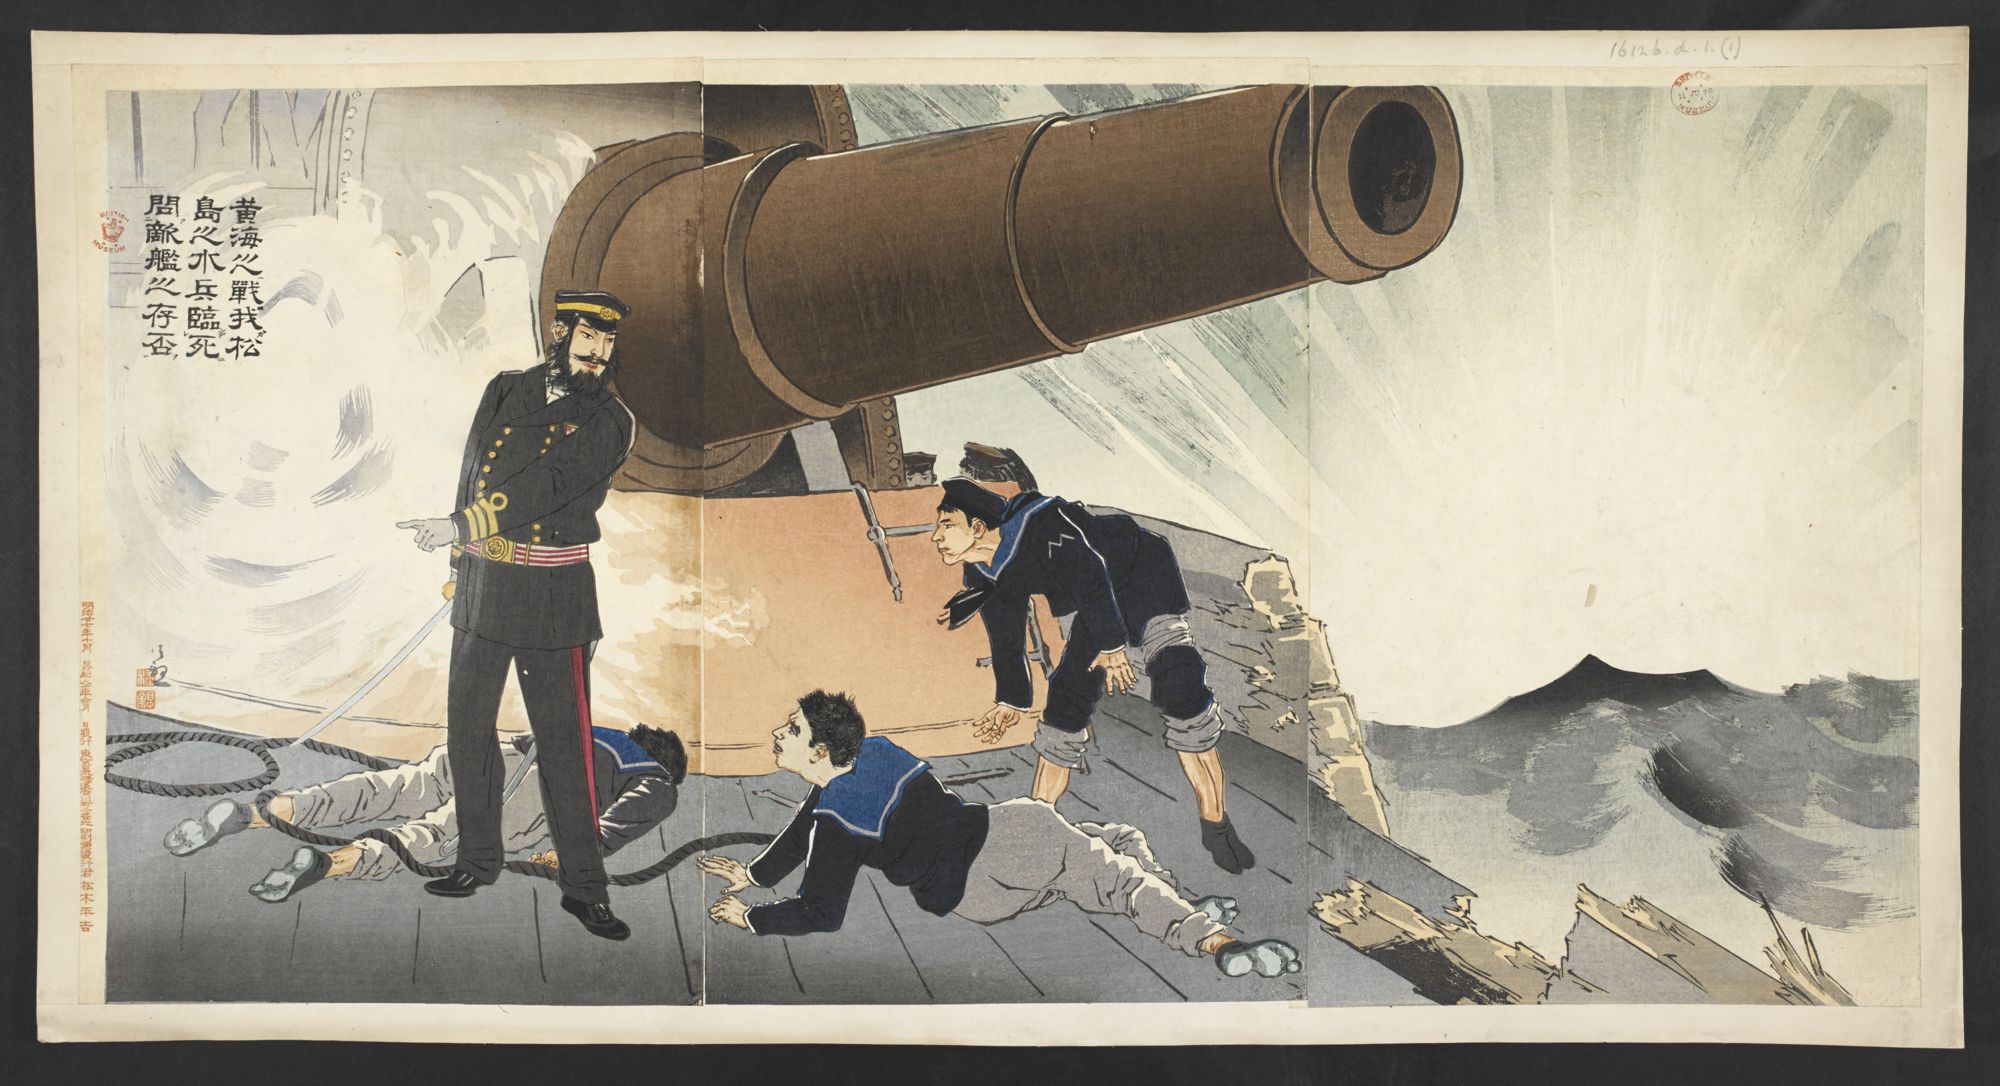 Aboard the battleship Matsushima during the Battle of the Yalu River two sailors facing death ask about the fate of the enemy ship